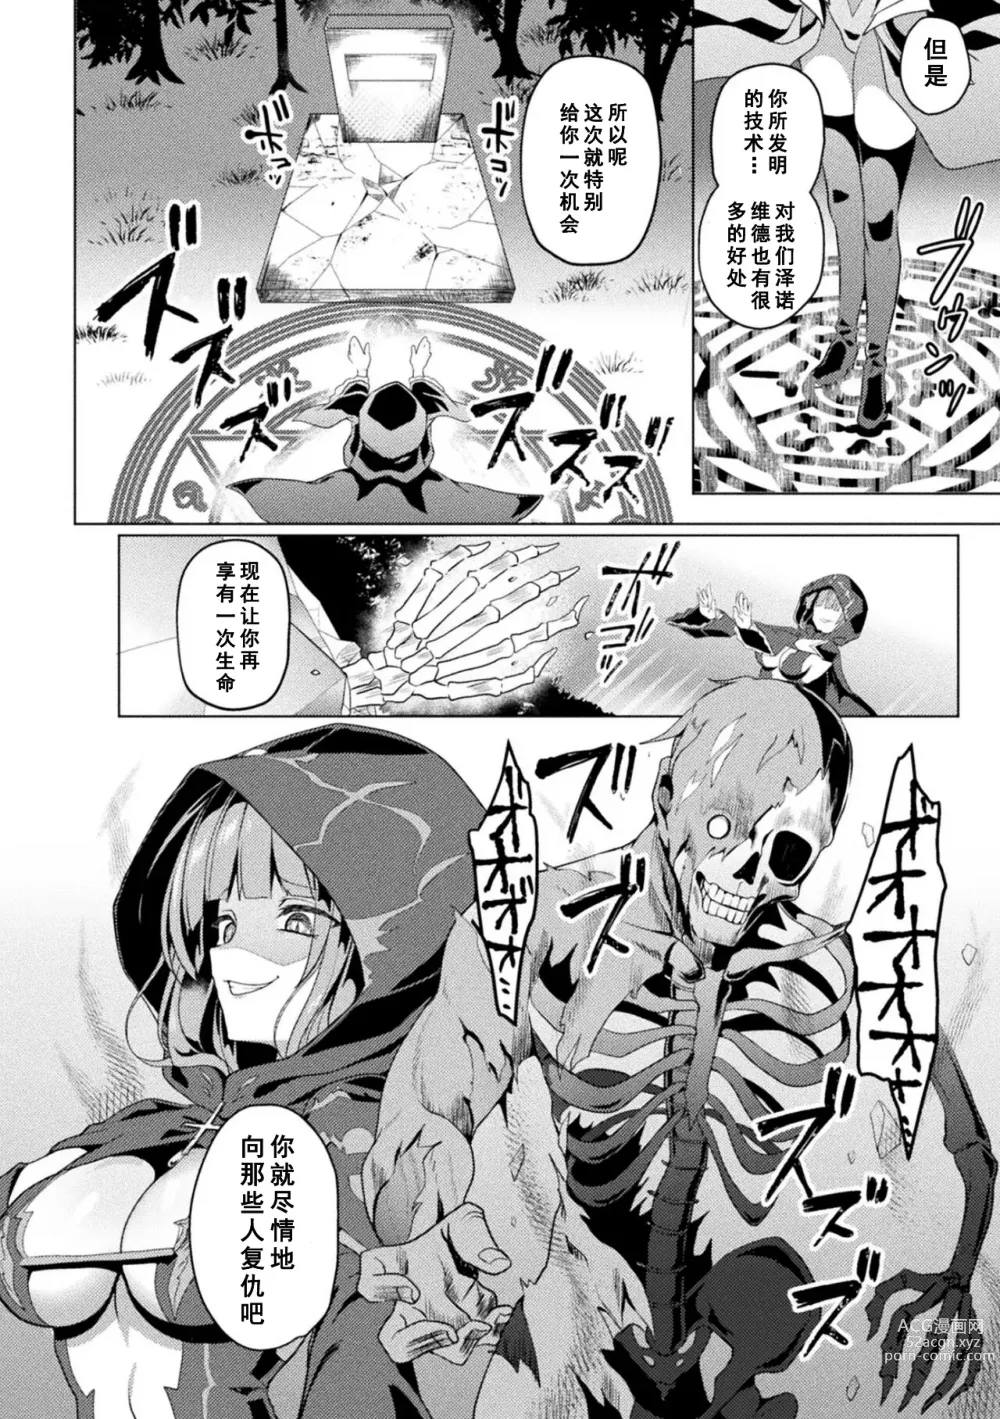 Page 2 of manga Edens Ritter Ch. 1 Gaiden - Innan no Mikohime Cecily Hen THE COMIC Ch. 1